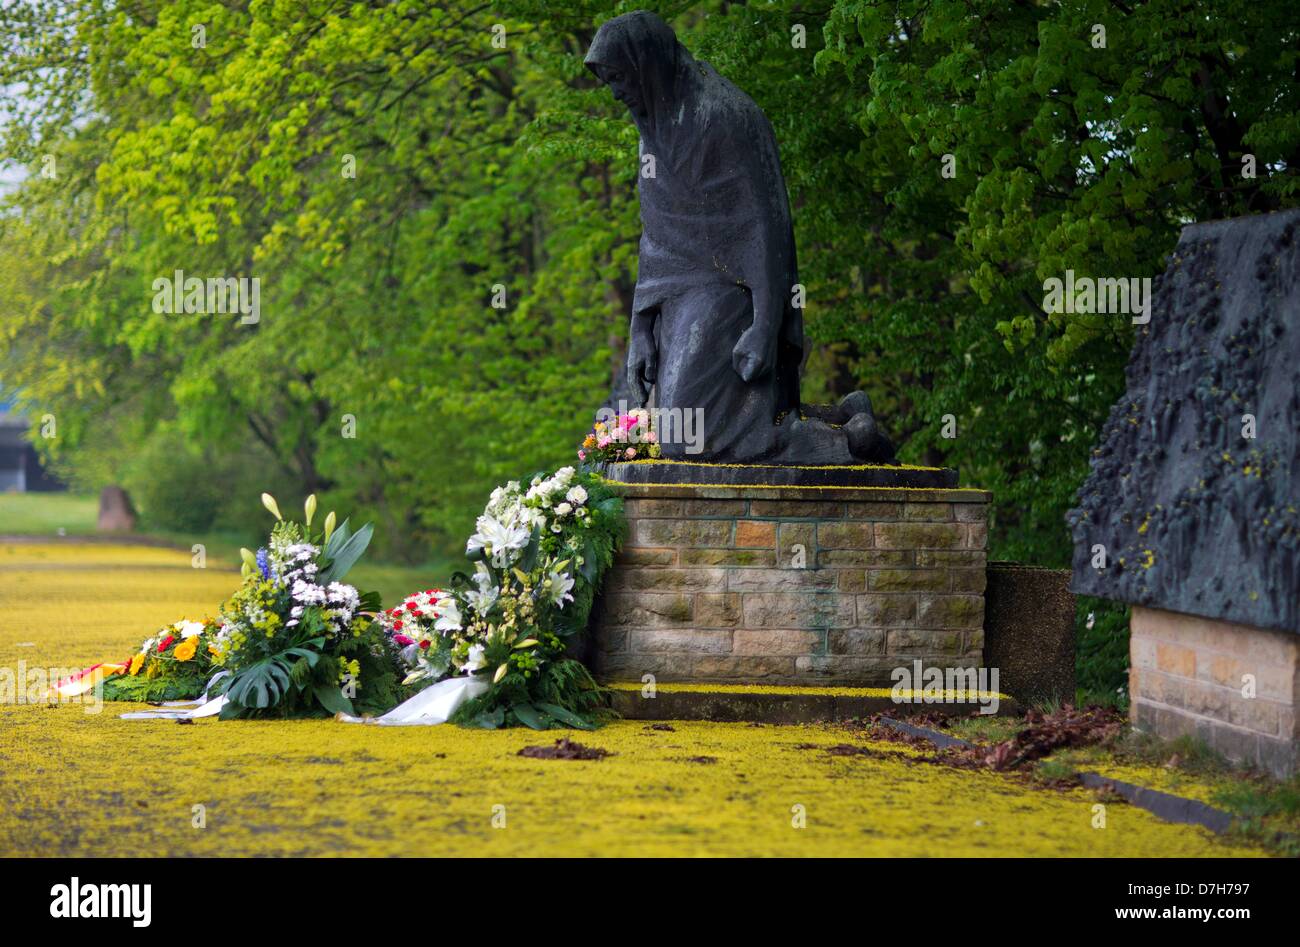 Wreaths are laid down at the memorial 'The Mother' to commemorate the end of World War II on 08 May 1945, in Raben-Steinfeld, Germany, 08 May 2013. Mecklenburg-Western Pomerania is the only German state which commits this day as official Remembrance Day. Photo: JENS BUETTNER Stock Photo